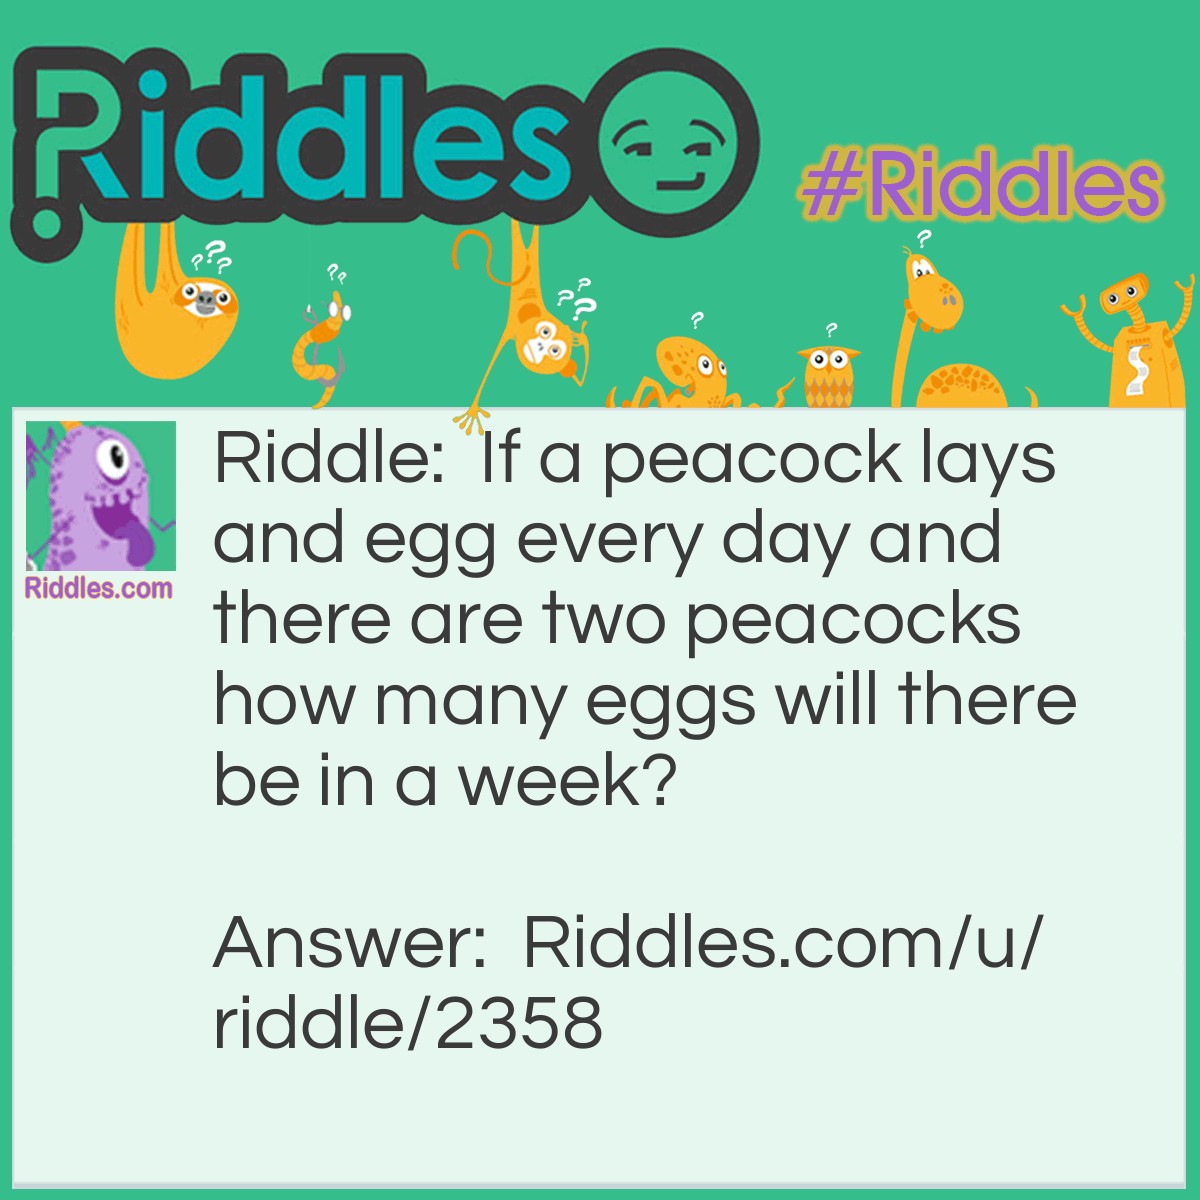 Riddle: If a peacock lays and egg every day and there are two peacocks how many eggs will there be in a week? Answer: None- peacocks don't lay eggs, peahens lay eggs.